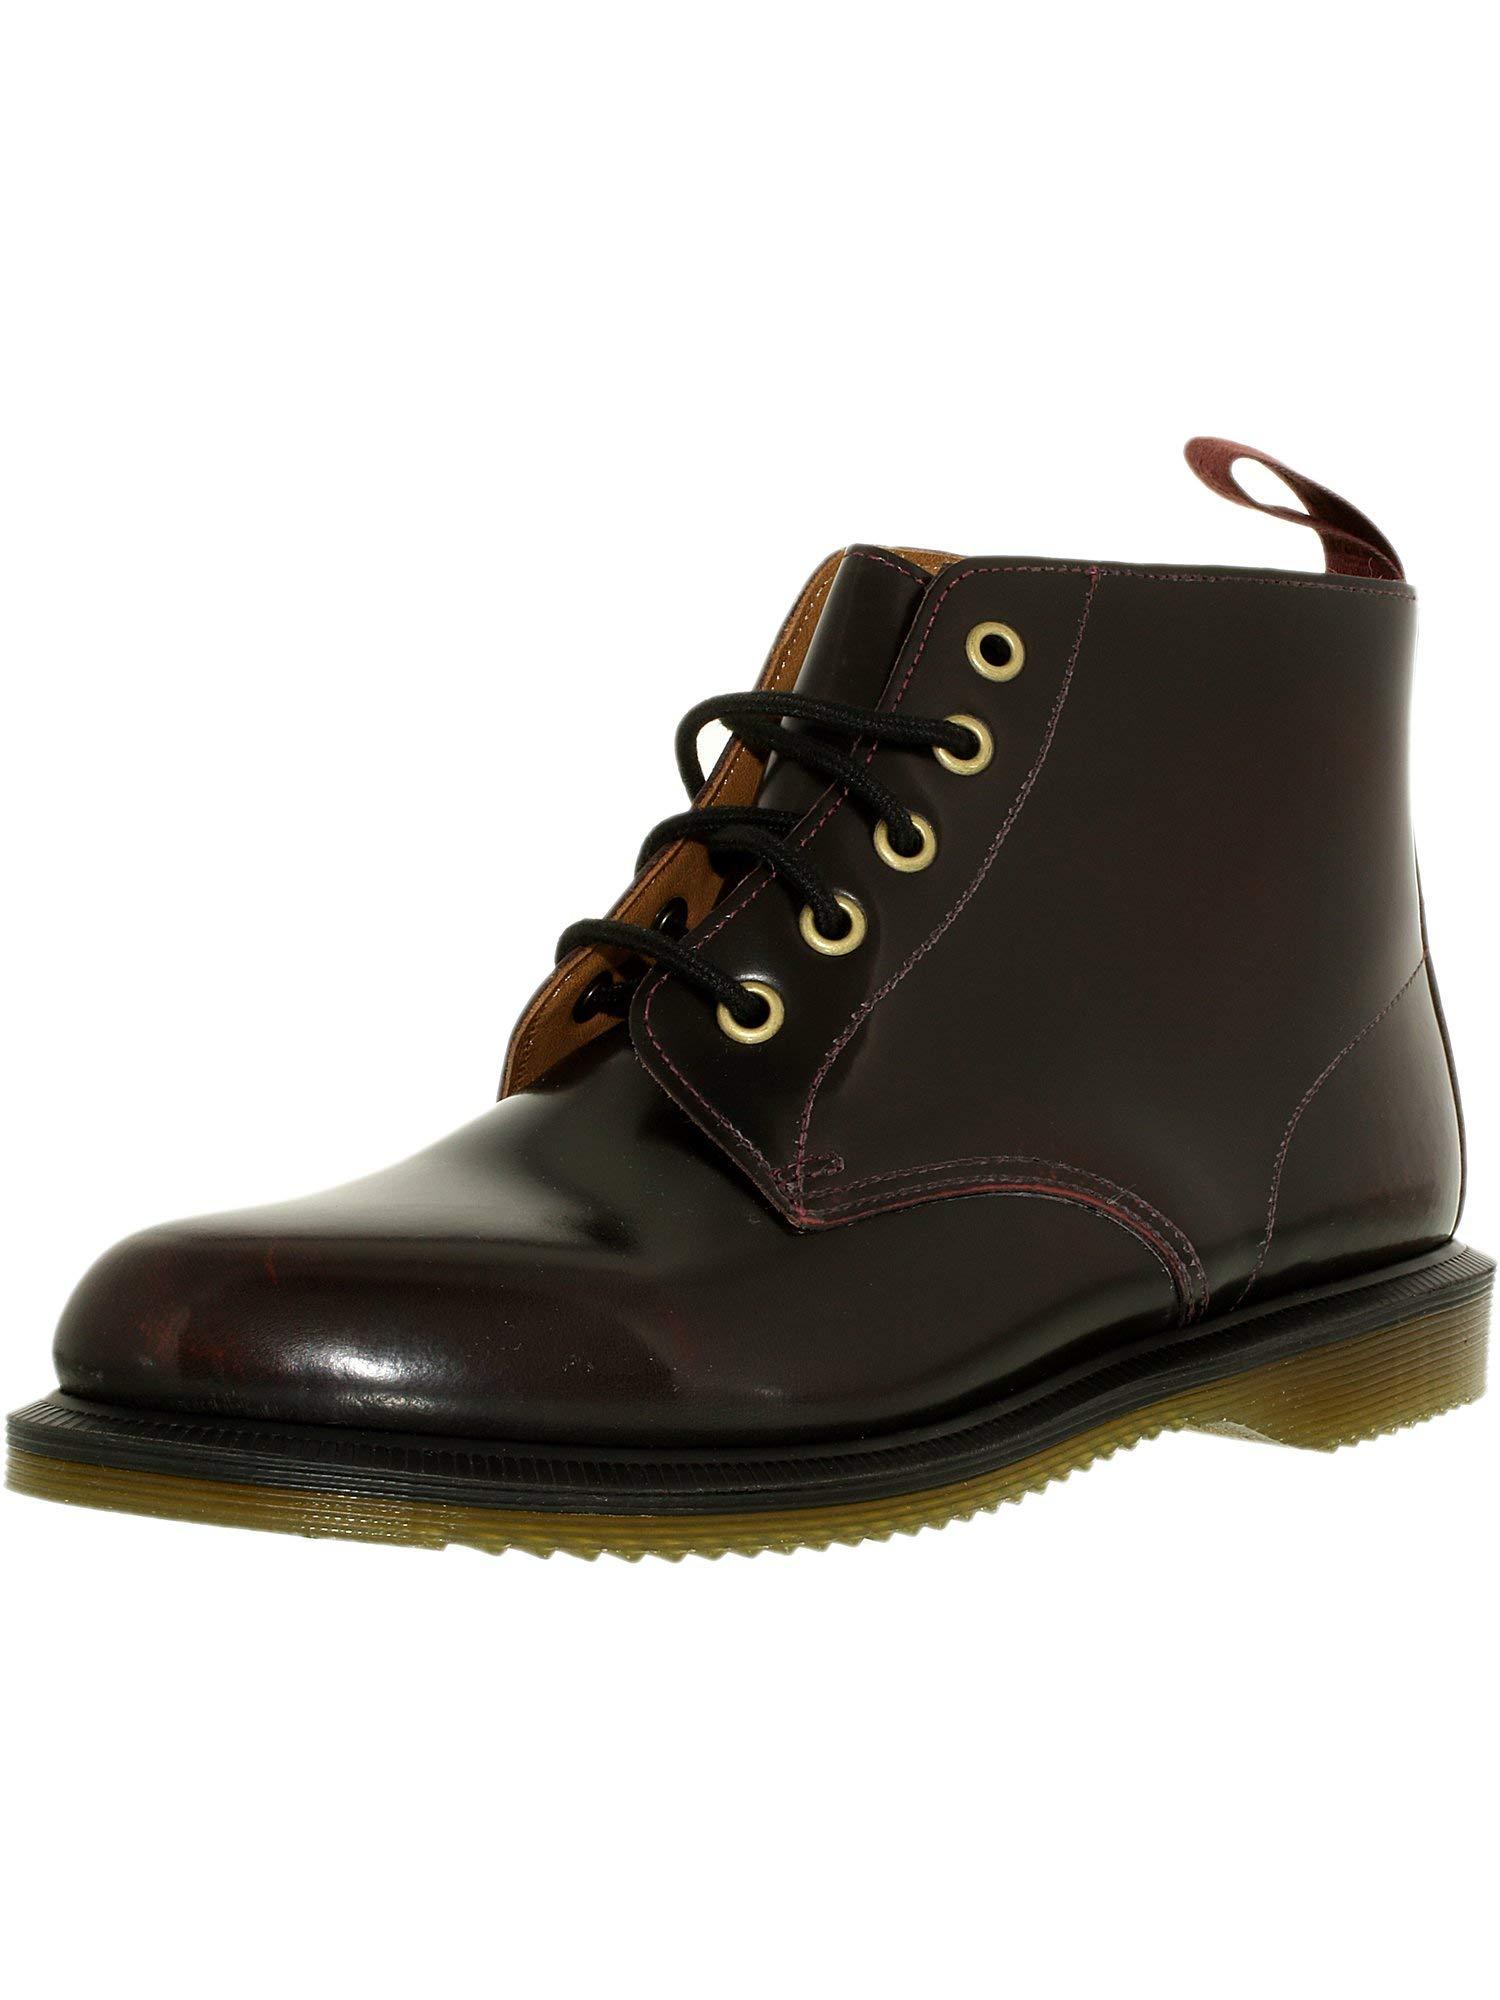 Dr. Martens Emmeline Arcadia Leather Lace Up Ankle Boots in Cherry Red  (Black) | Lyst